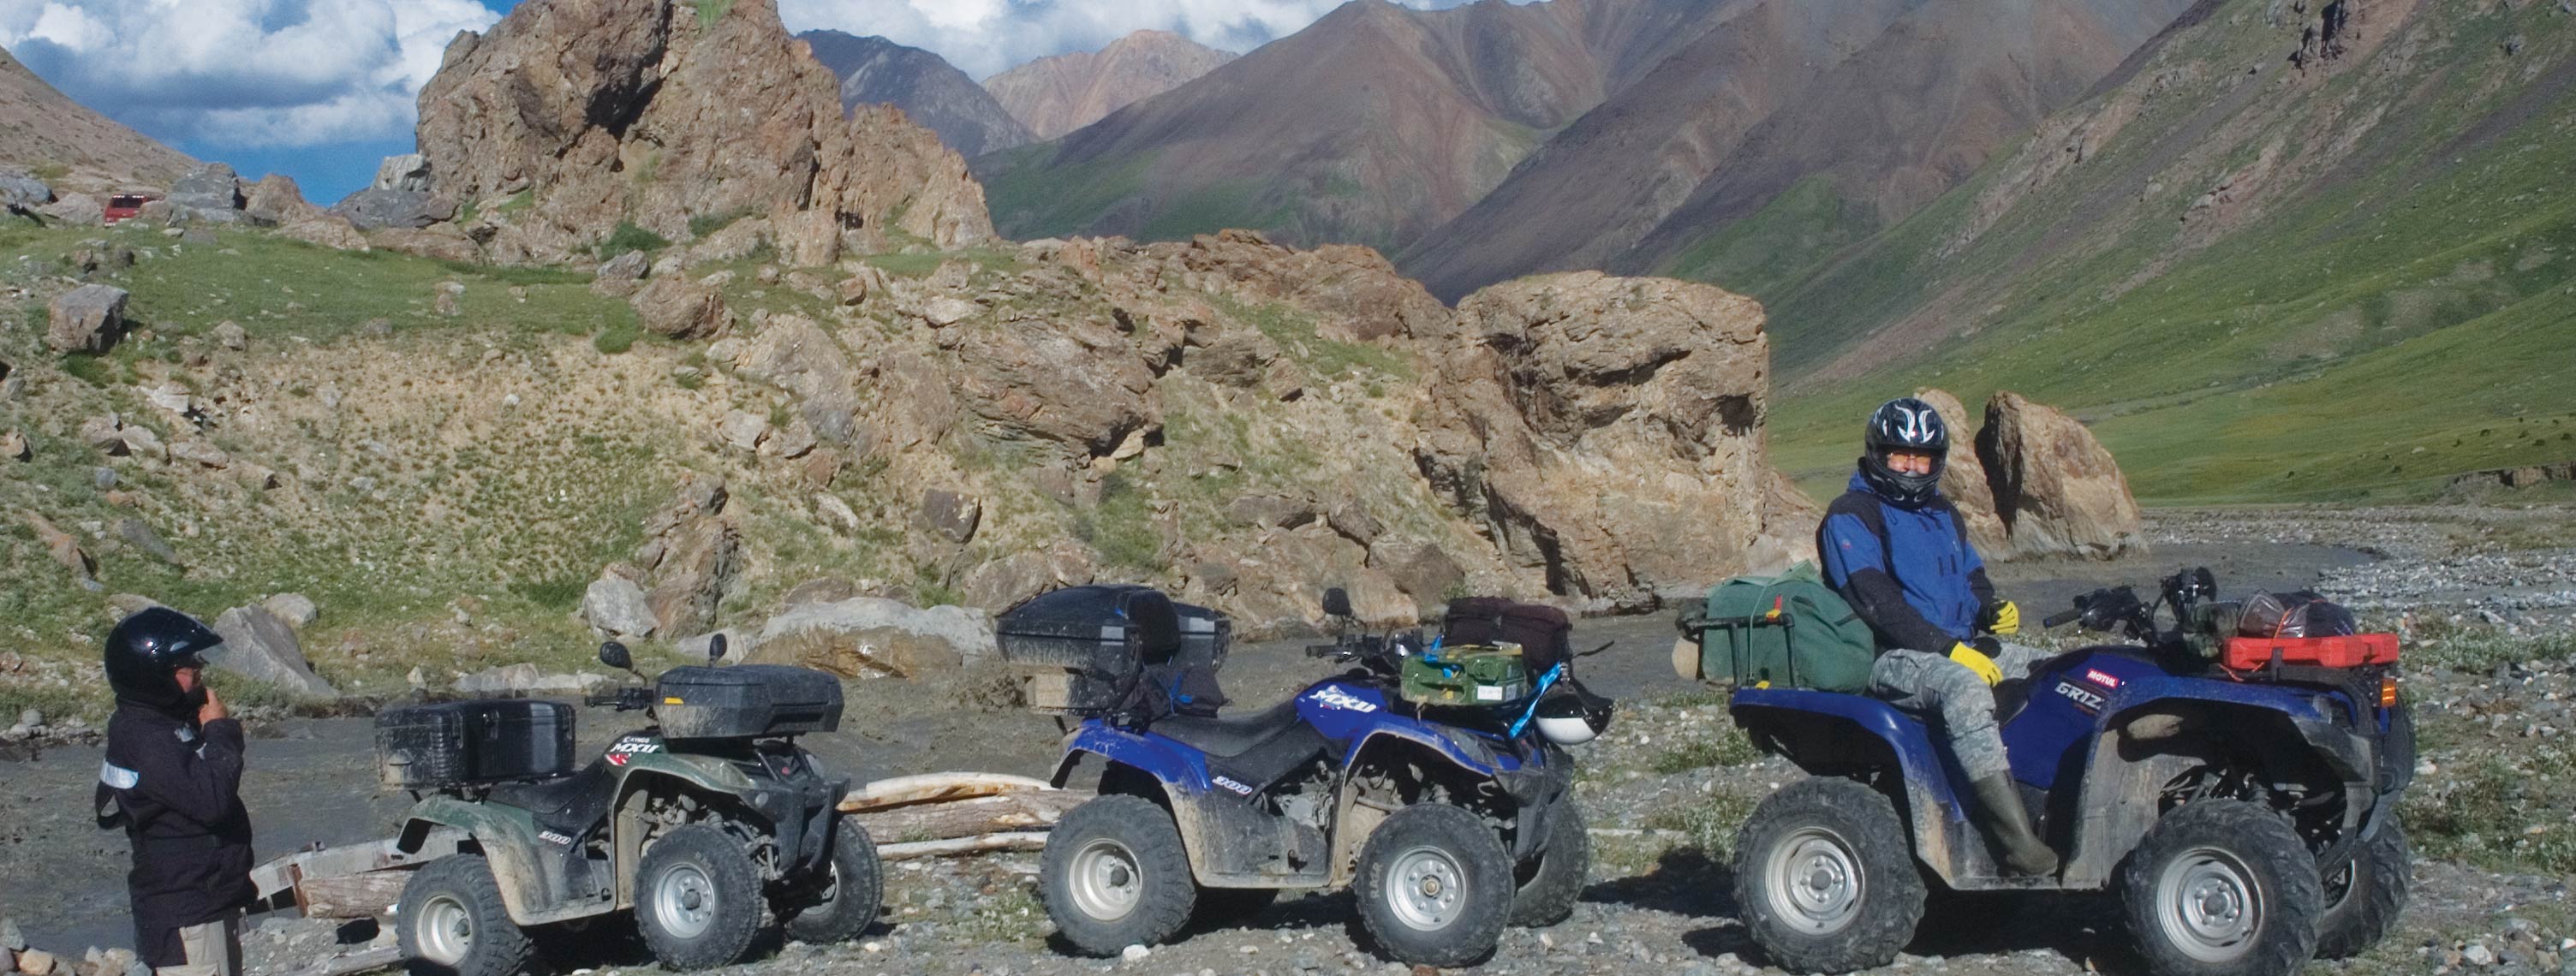 Quad offroad Tour at the M41 Pamir Highway